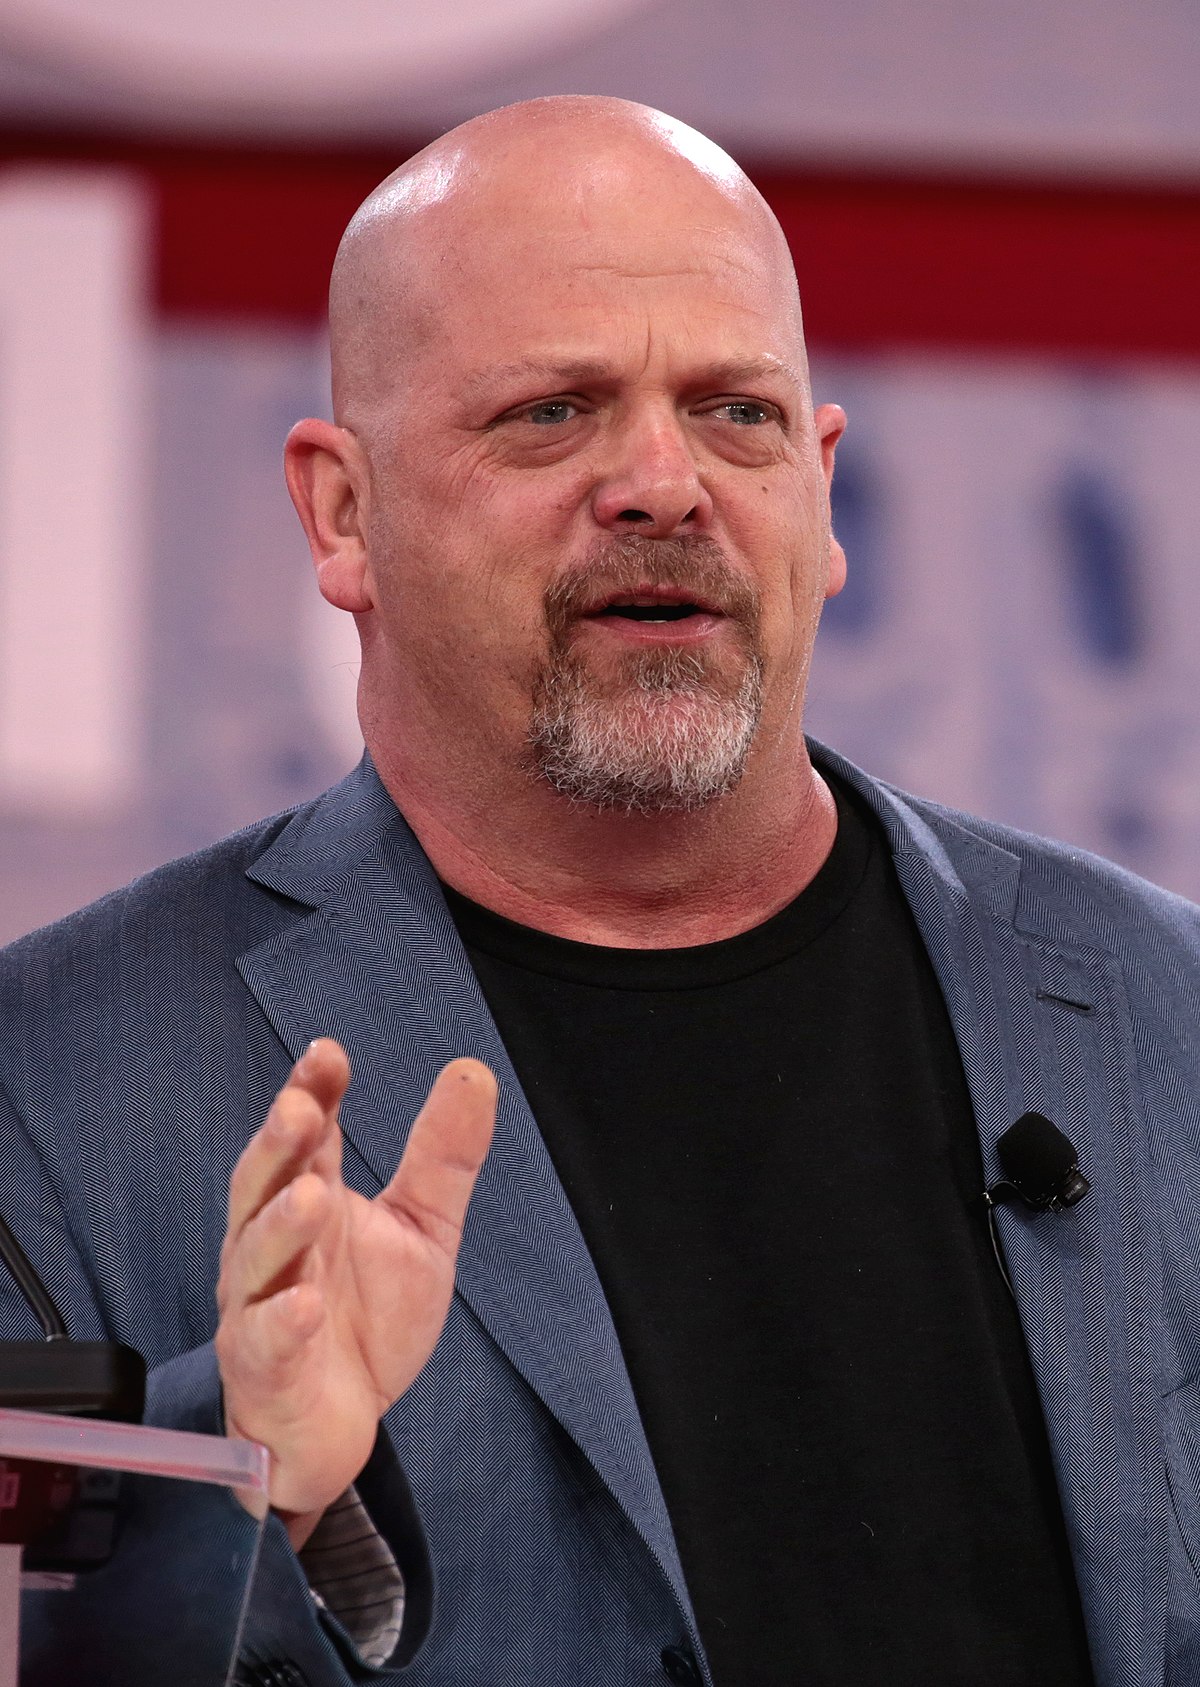 The 57-year old son of father Richard Benjamin Harrison Jr. and mother Joanne Rhue Harrison Rick Harrison in 2023 photo. Rick Harrison earned a  million dollar salary - leaving the net worth at 5 million in 2023